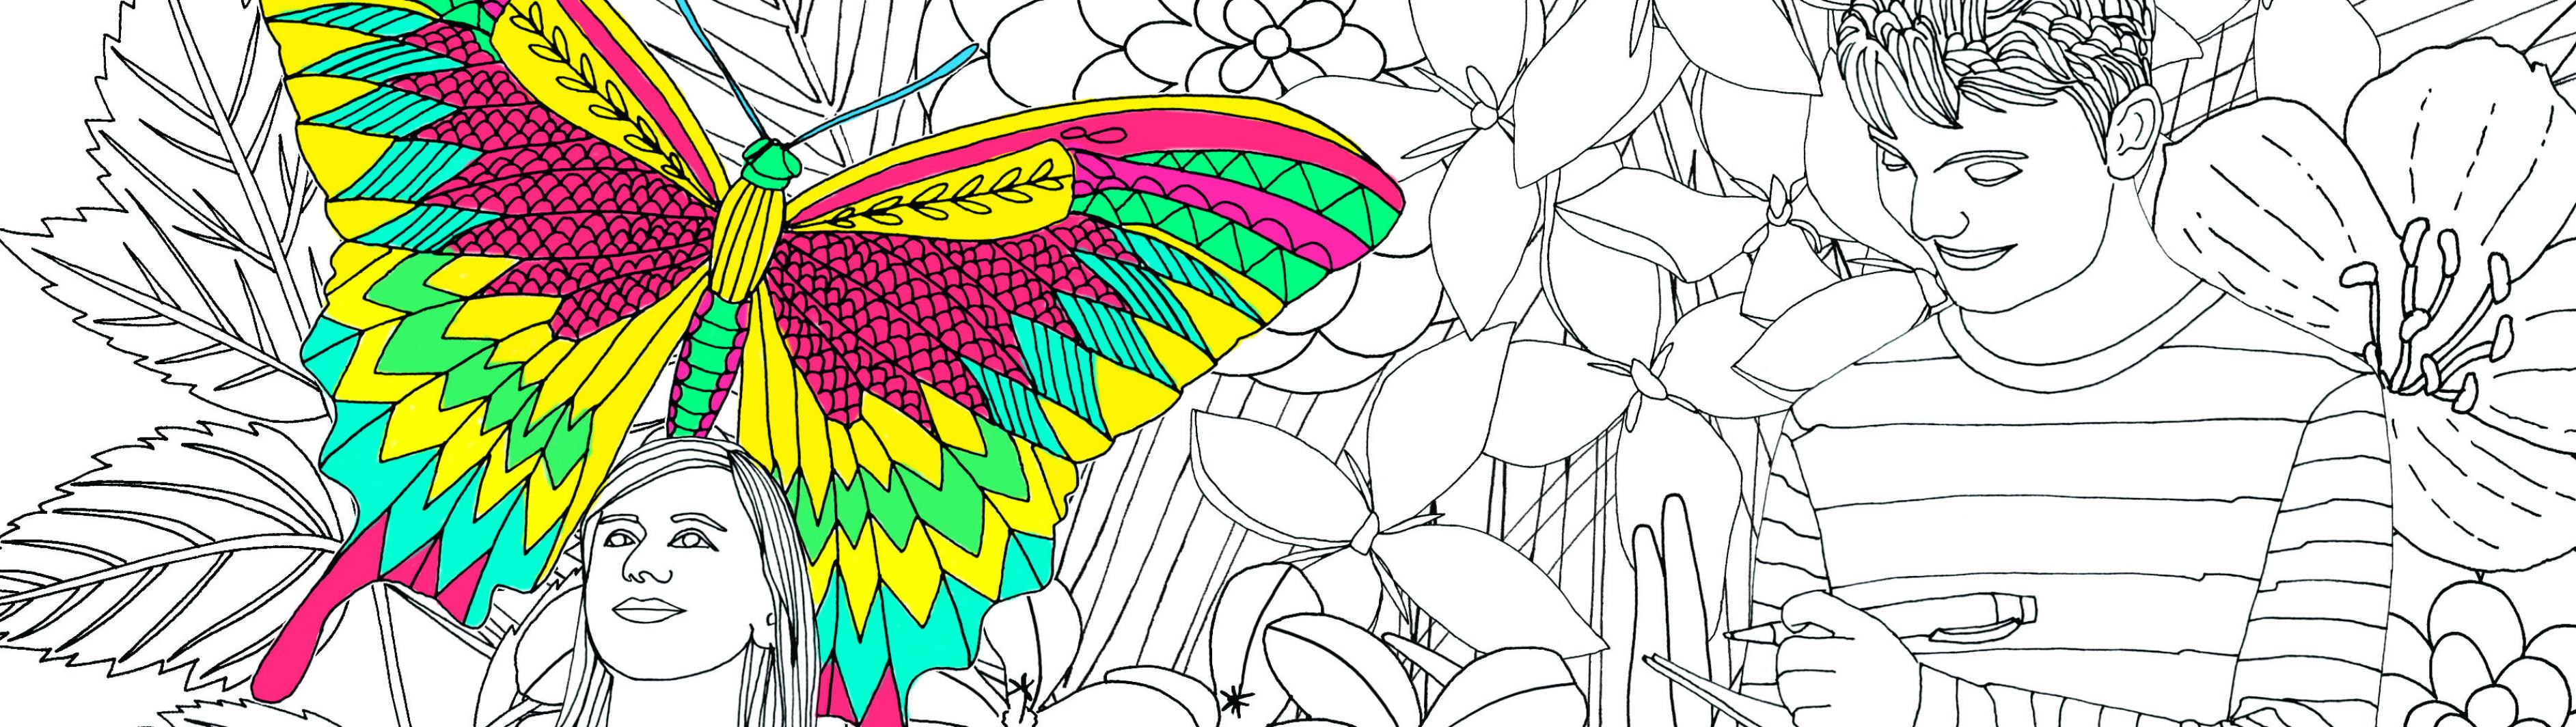 Coloring Book Cover 2